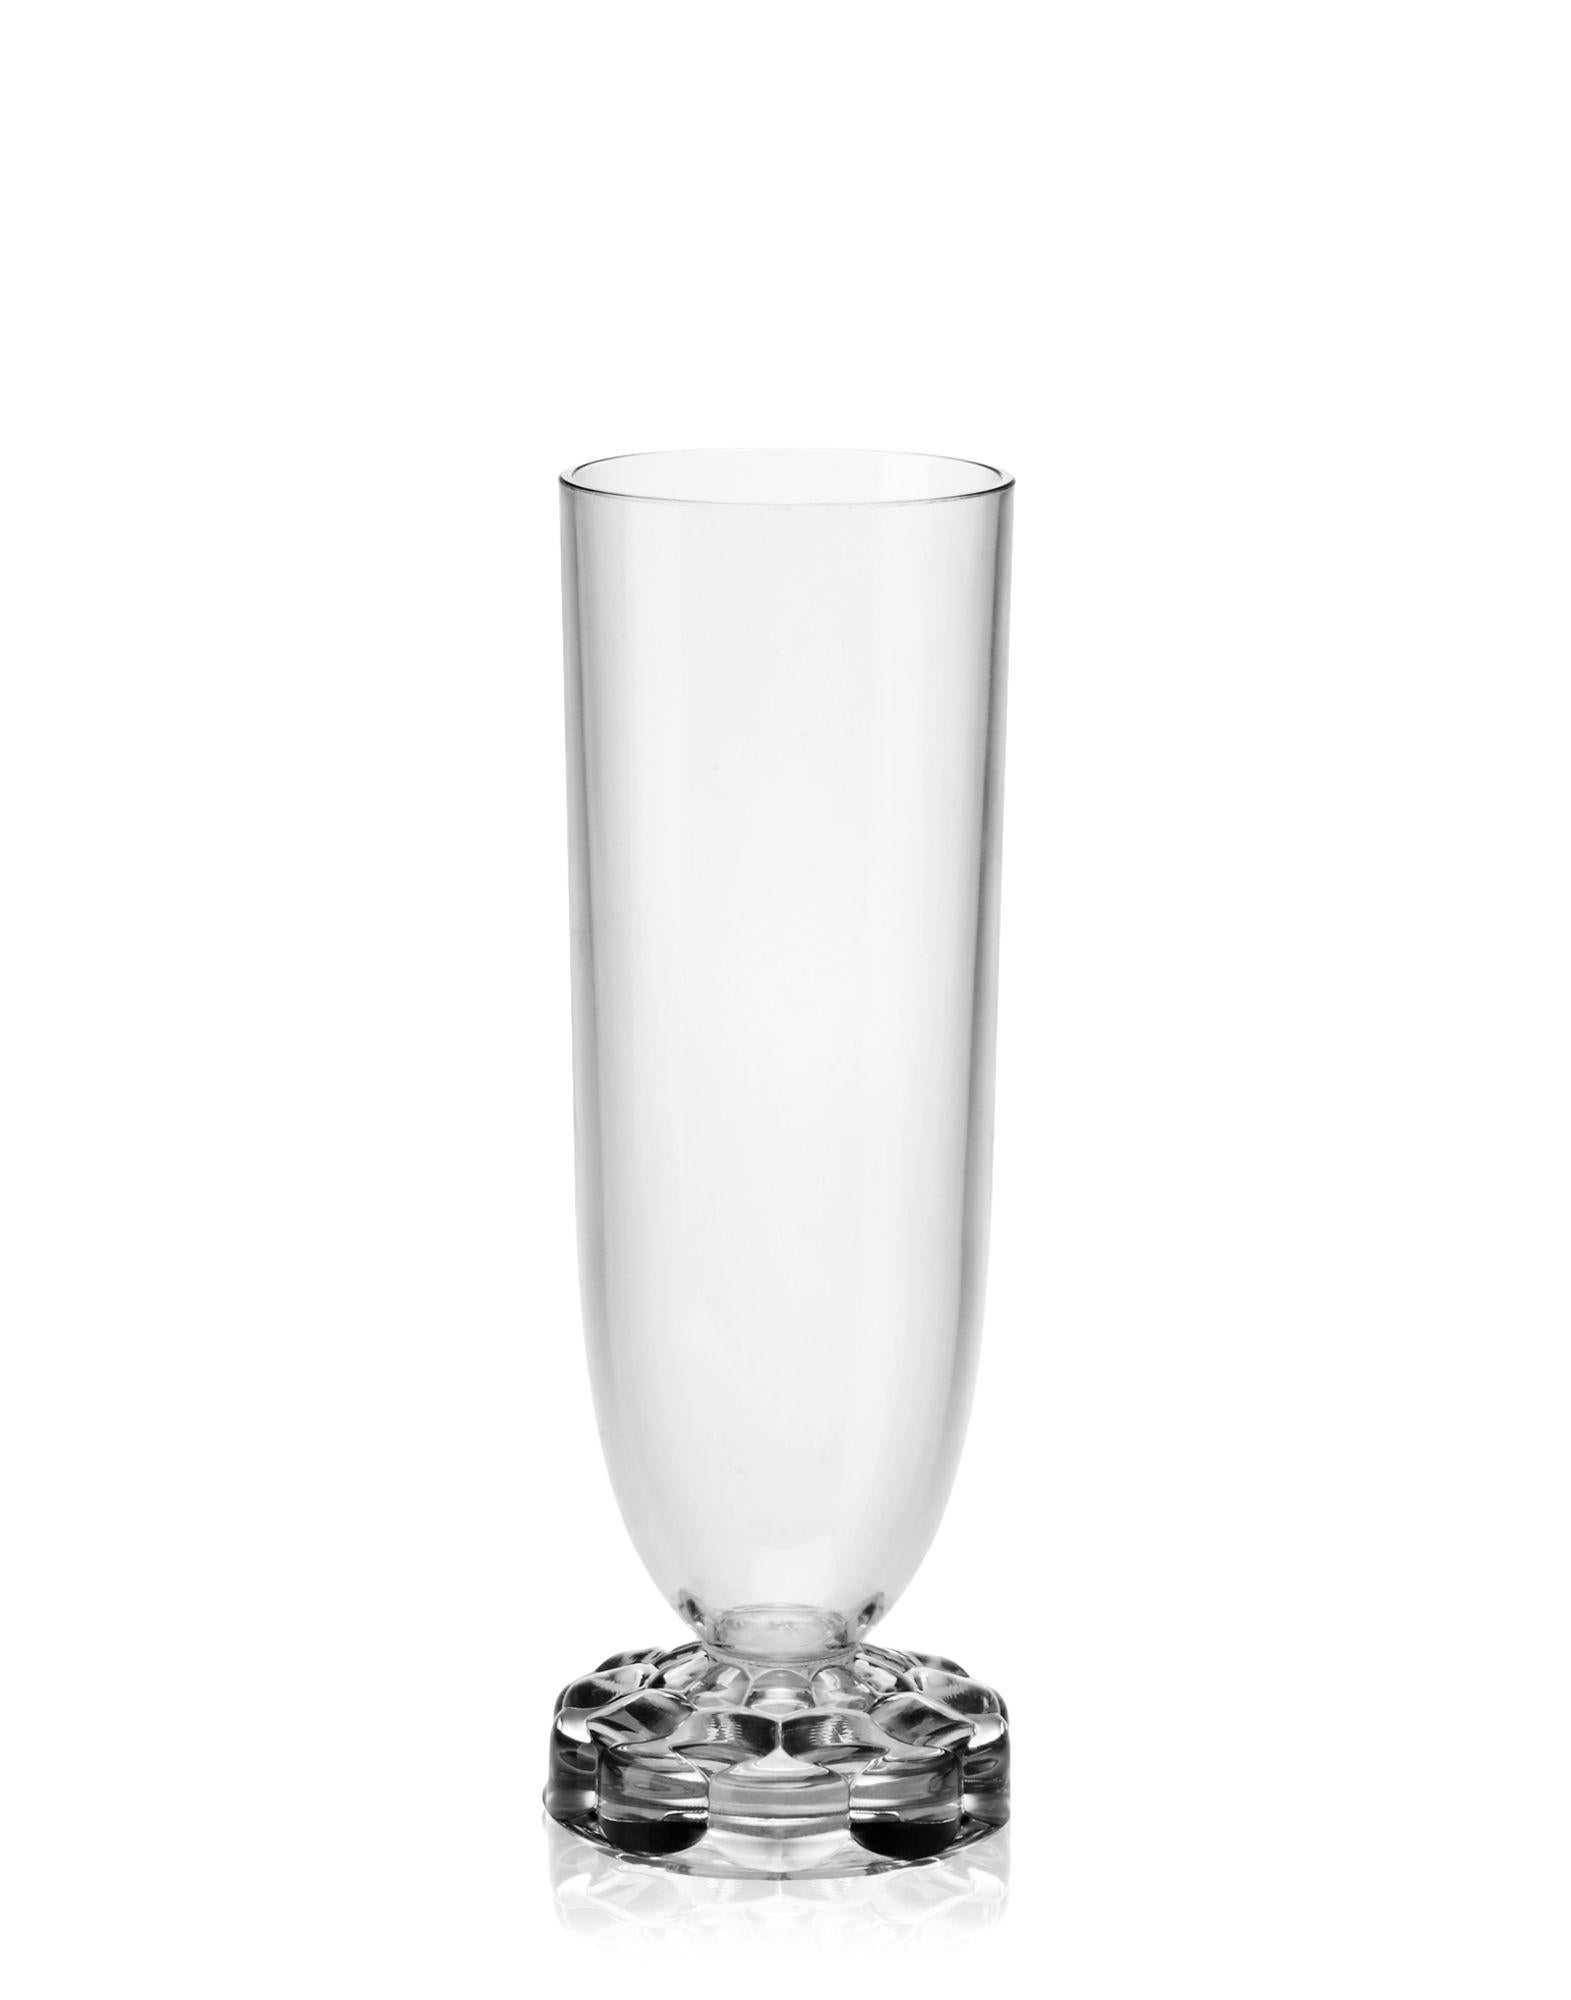 The Jellies family tableware line has been expanded to include new items designed especially for the Christmas holidays and for ringing in the new year, the Jellies champagne flute.

Dimensions: Height 6.75 in.; Diameter 2.13 in.; Unit weight 0.12